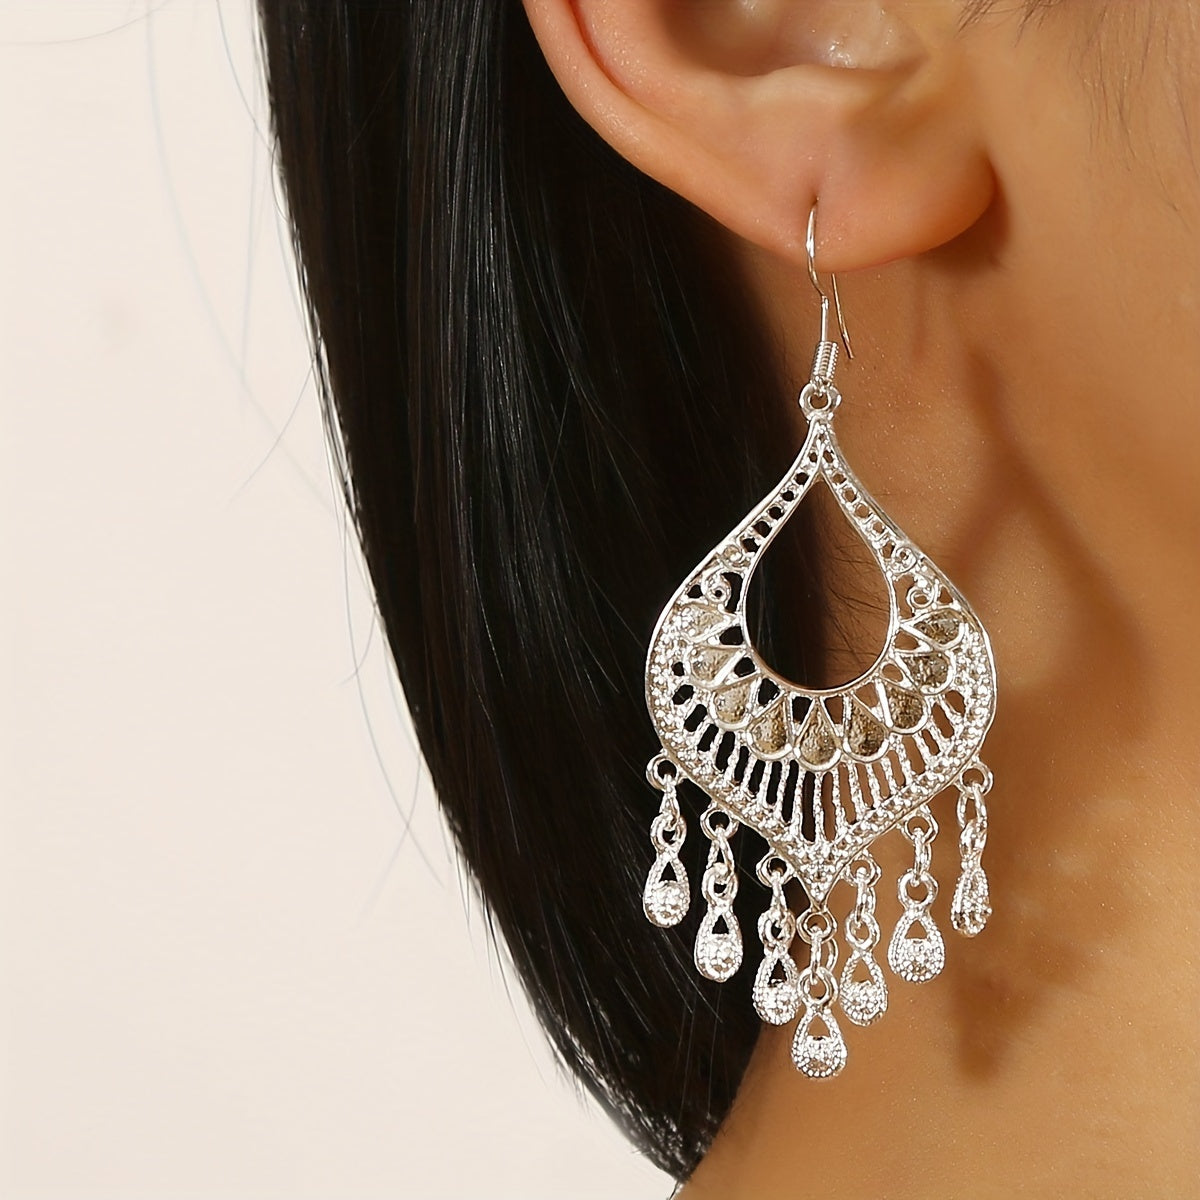 Gorgeous Bohemian Earrings - Zinc Alloy Silver Plated Jewelry - Perfect Gift for the Elegant Woman!